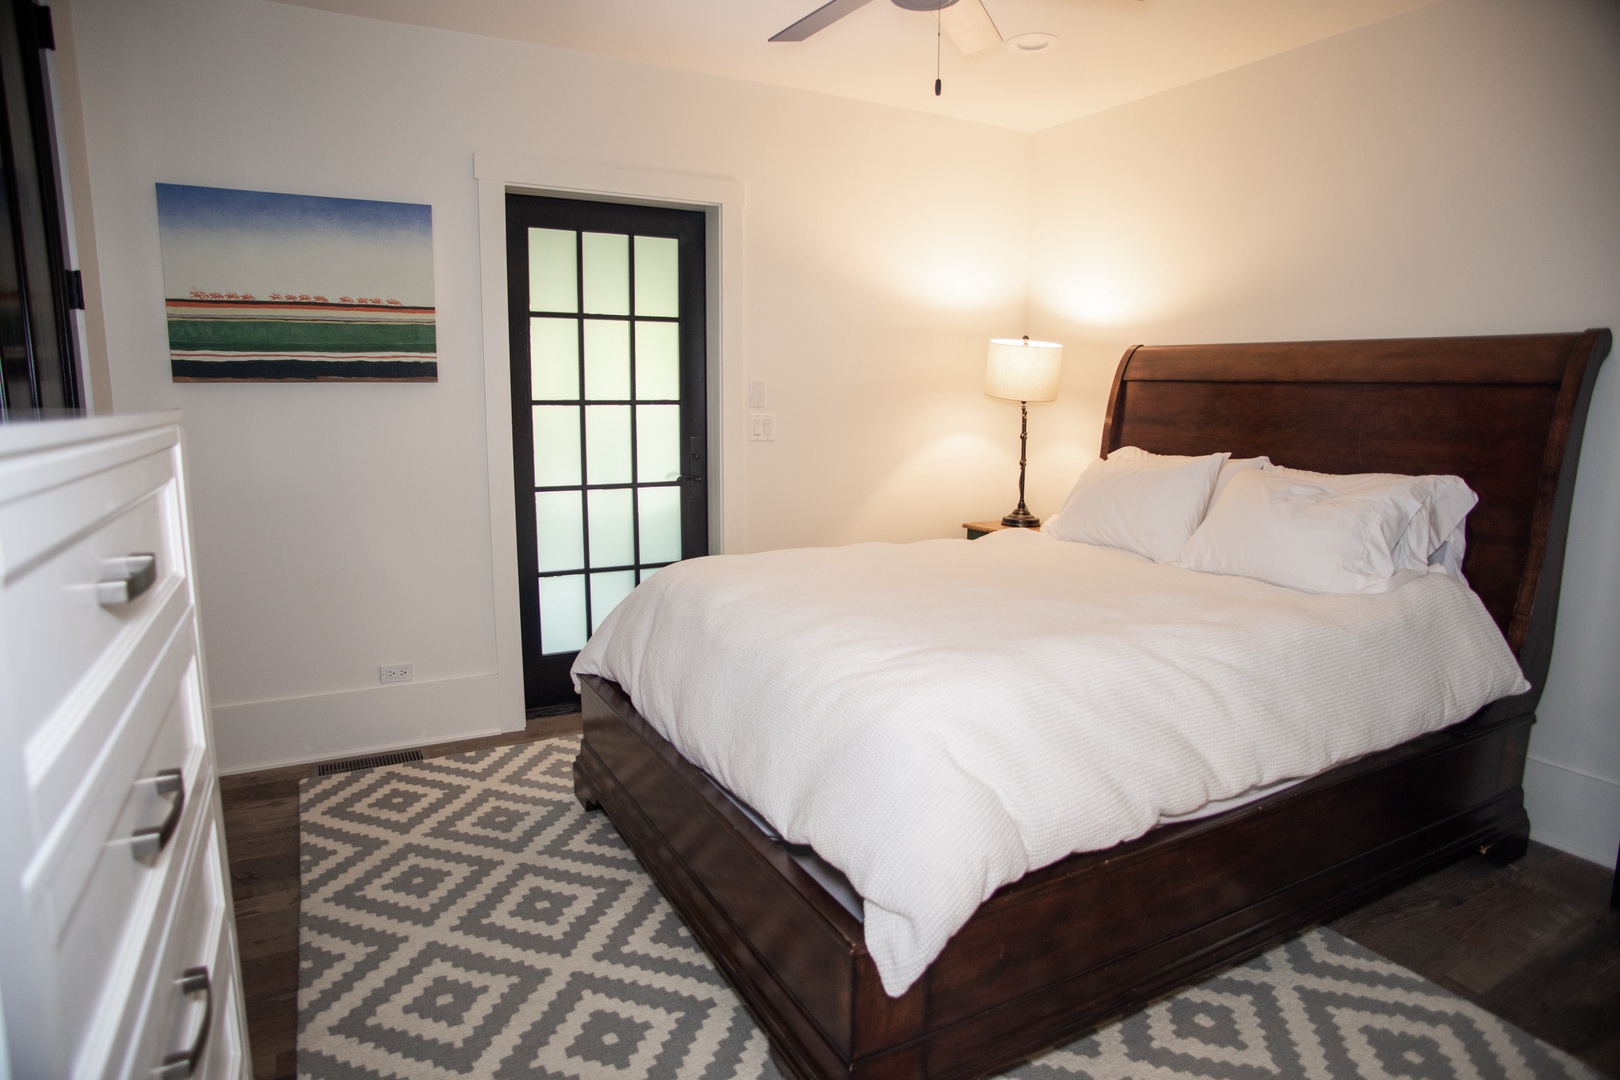 Every bedroom is styled with luxury linens, furnishings, and a Smart TV.